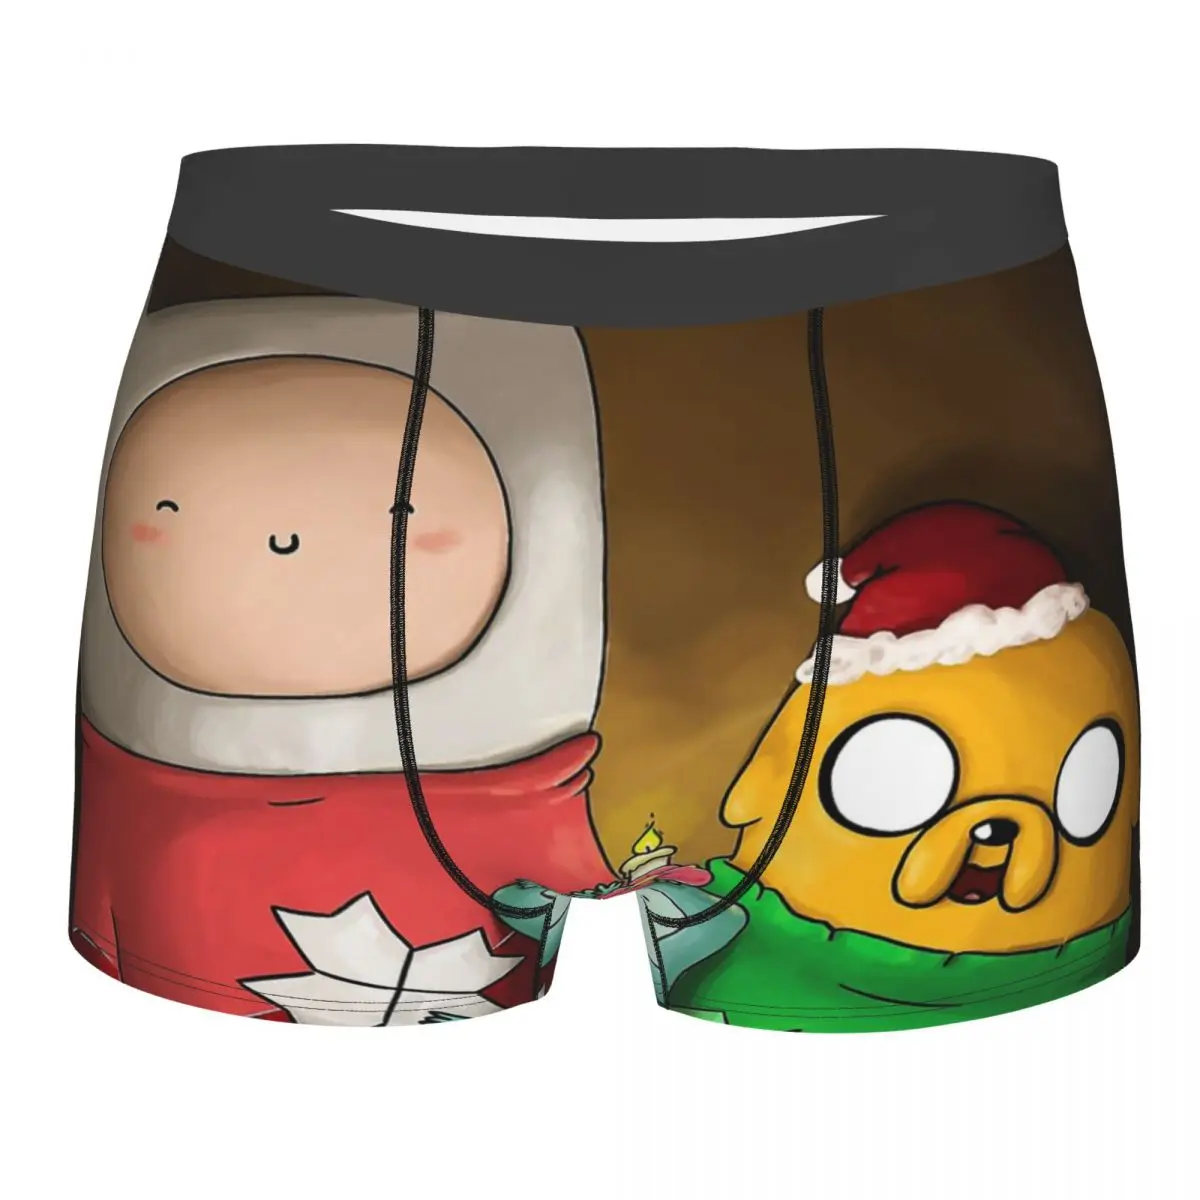 

Merry Christmas Man's Boxer Briefs Friendship Forever Highly Breathable Underpants High Quality Print Shorts Gift Idea